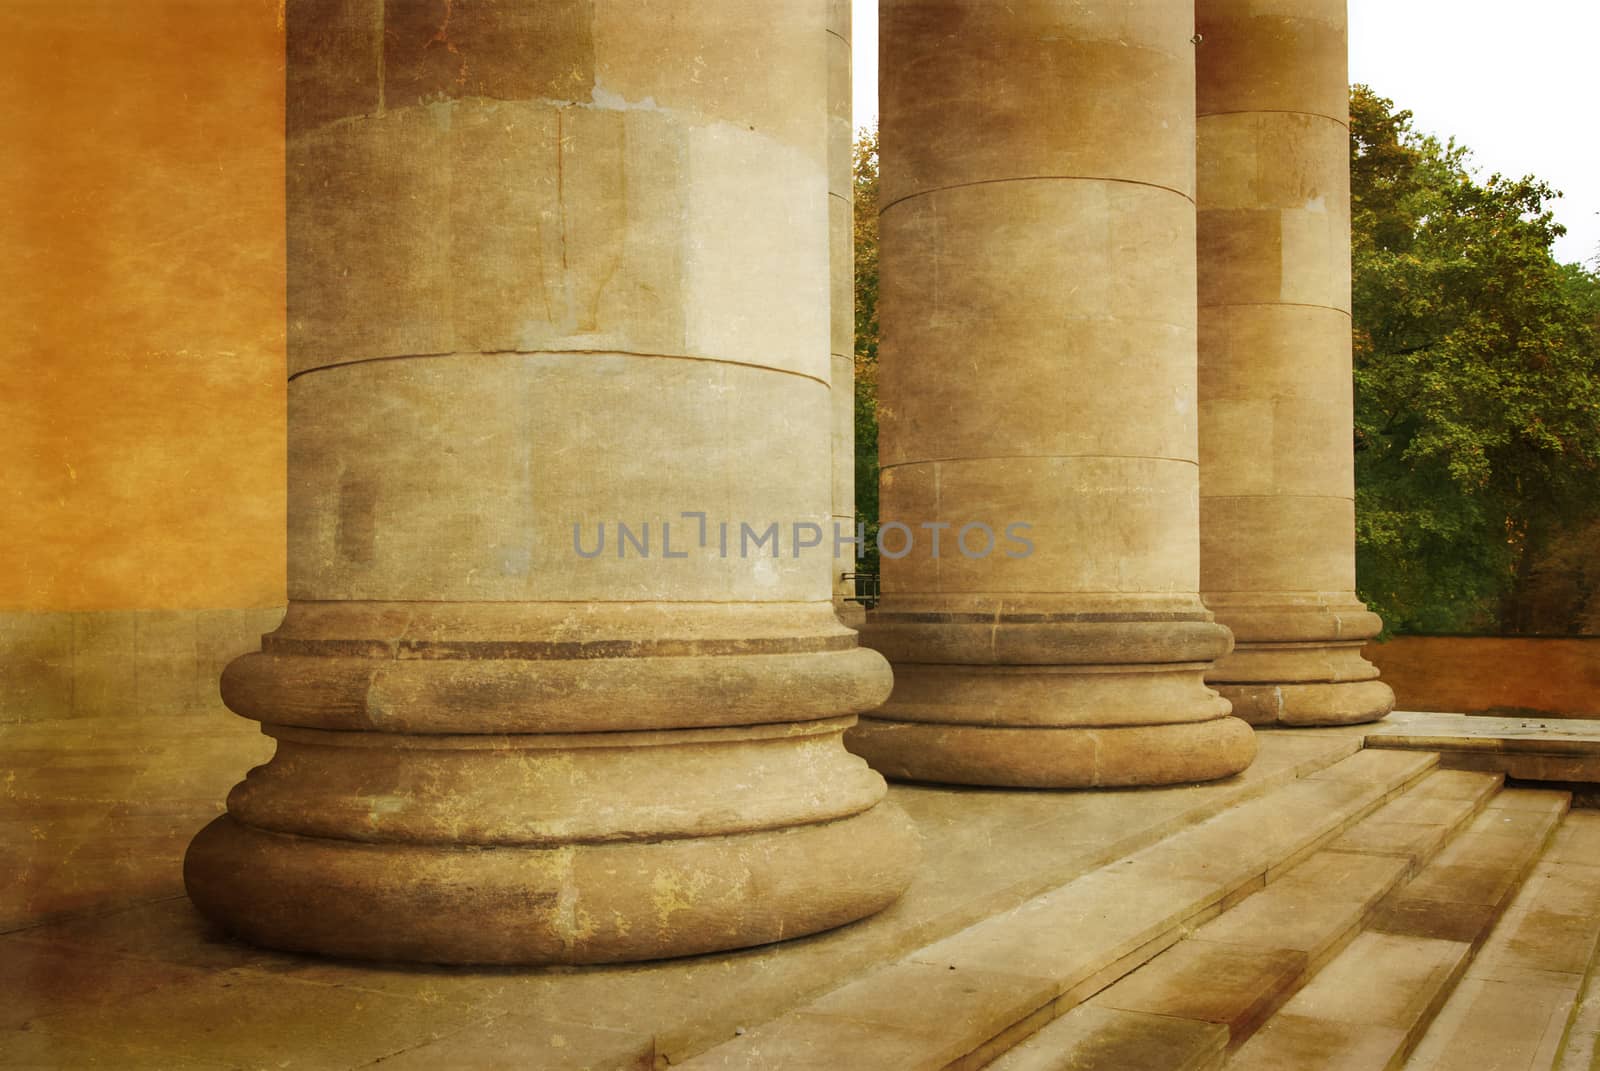 Stone Pillars in a Row. Photo in old color image style.